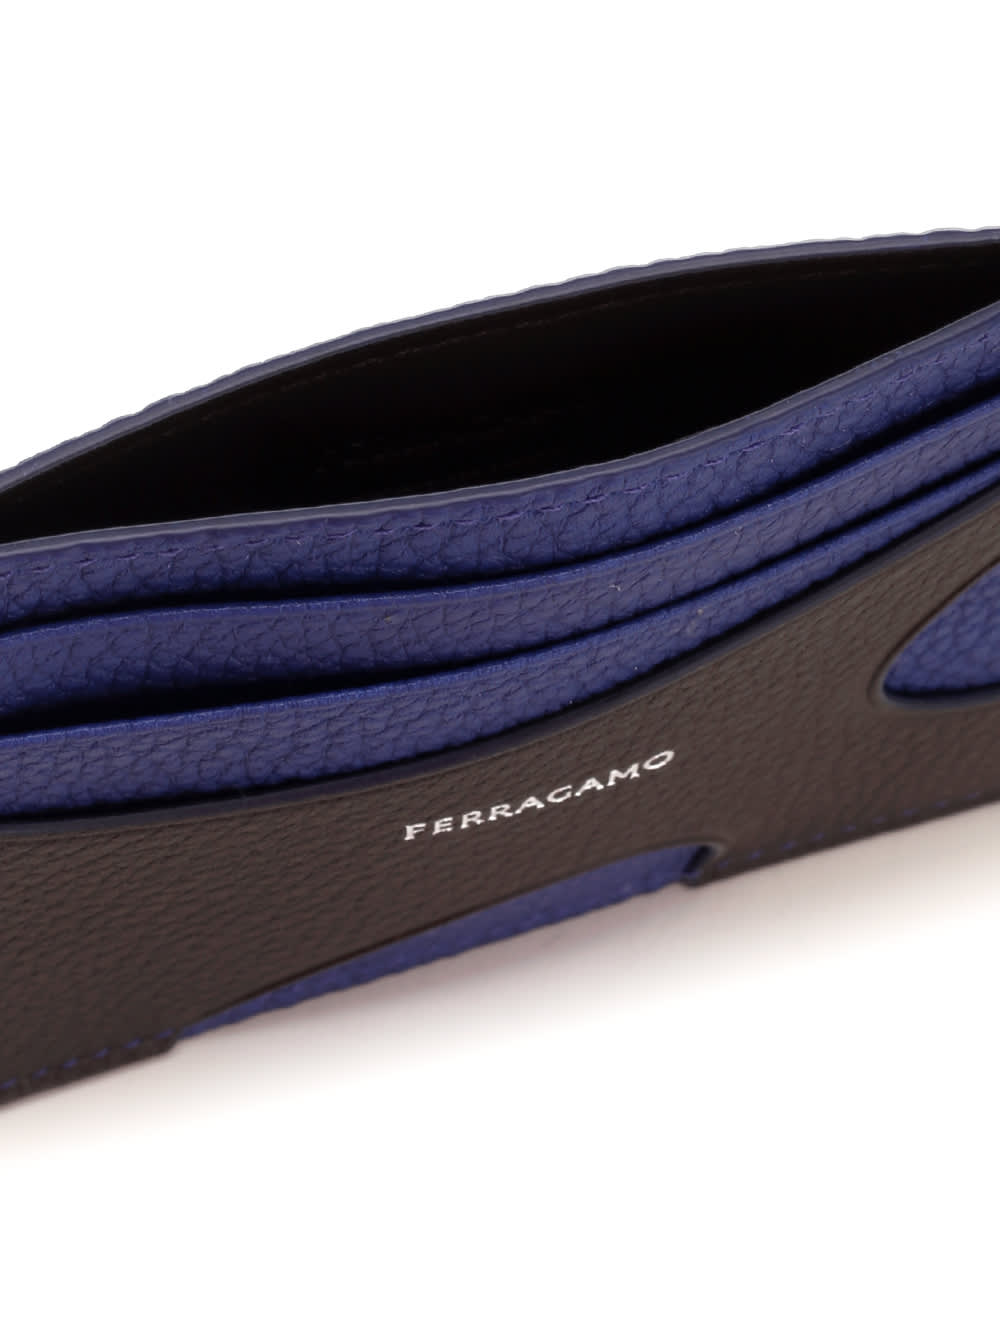 Shop Ferragamo Black Card Holder With Blue Cut Out In T.moro/lapis